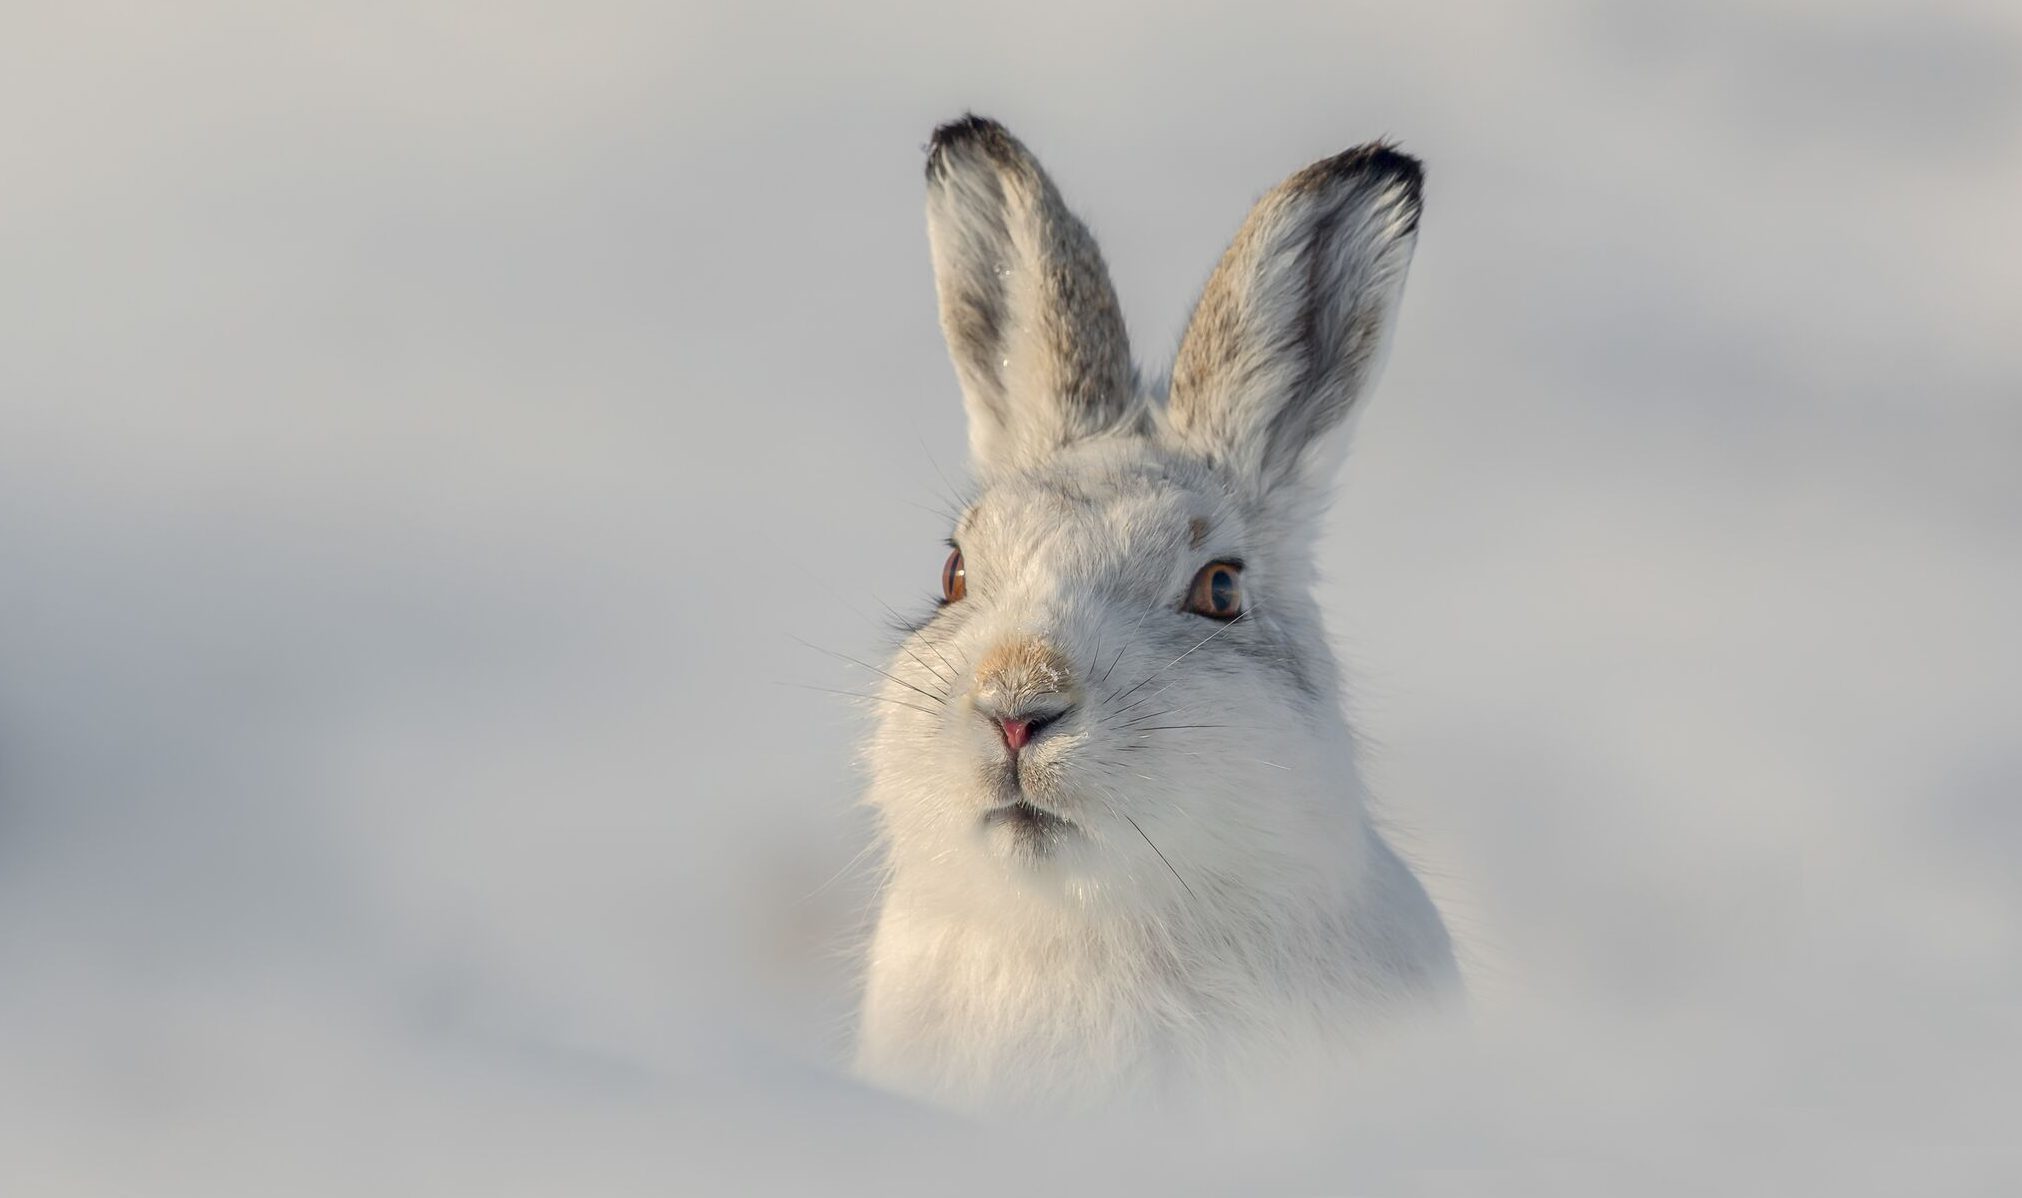 Mountain hare by Raymond Leinster